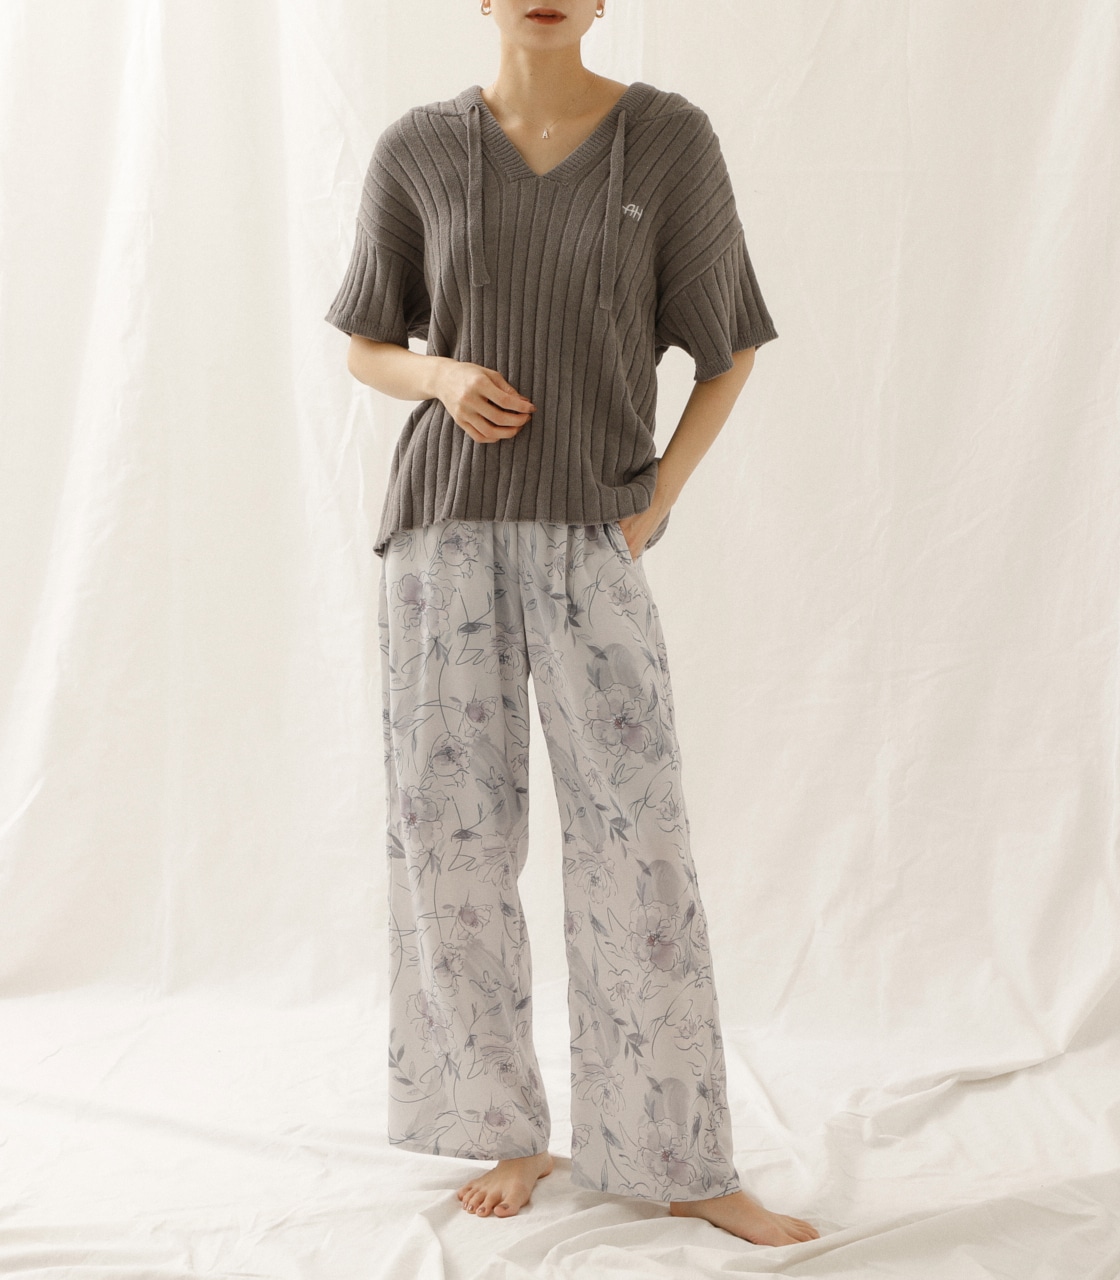 【AZUL HOME】 FLOWER PATTERN LONG PT/フラワーパターンロングパンツ 詳細画像 柄GRY 4